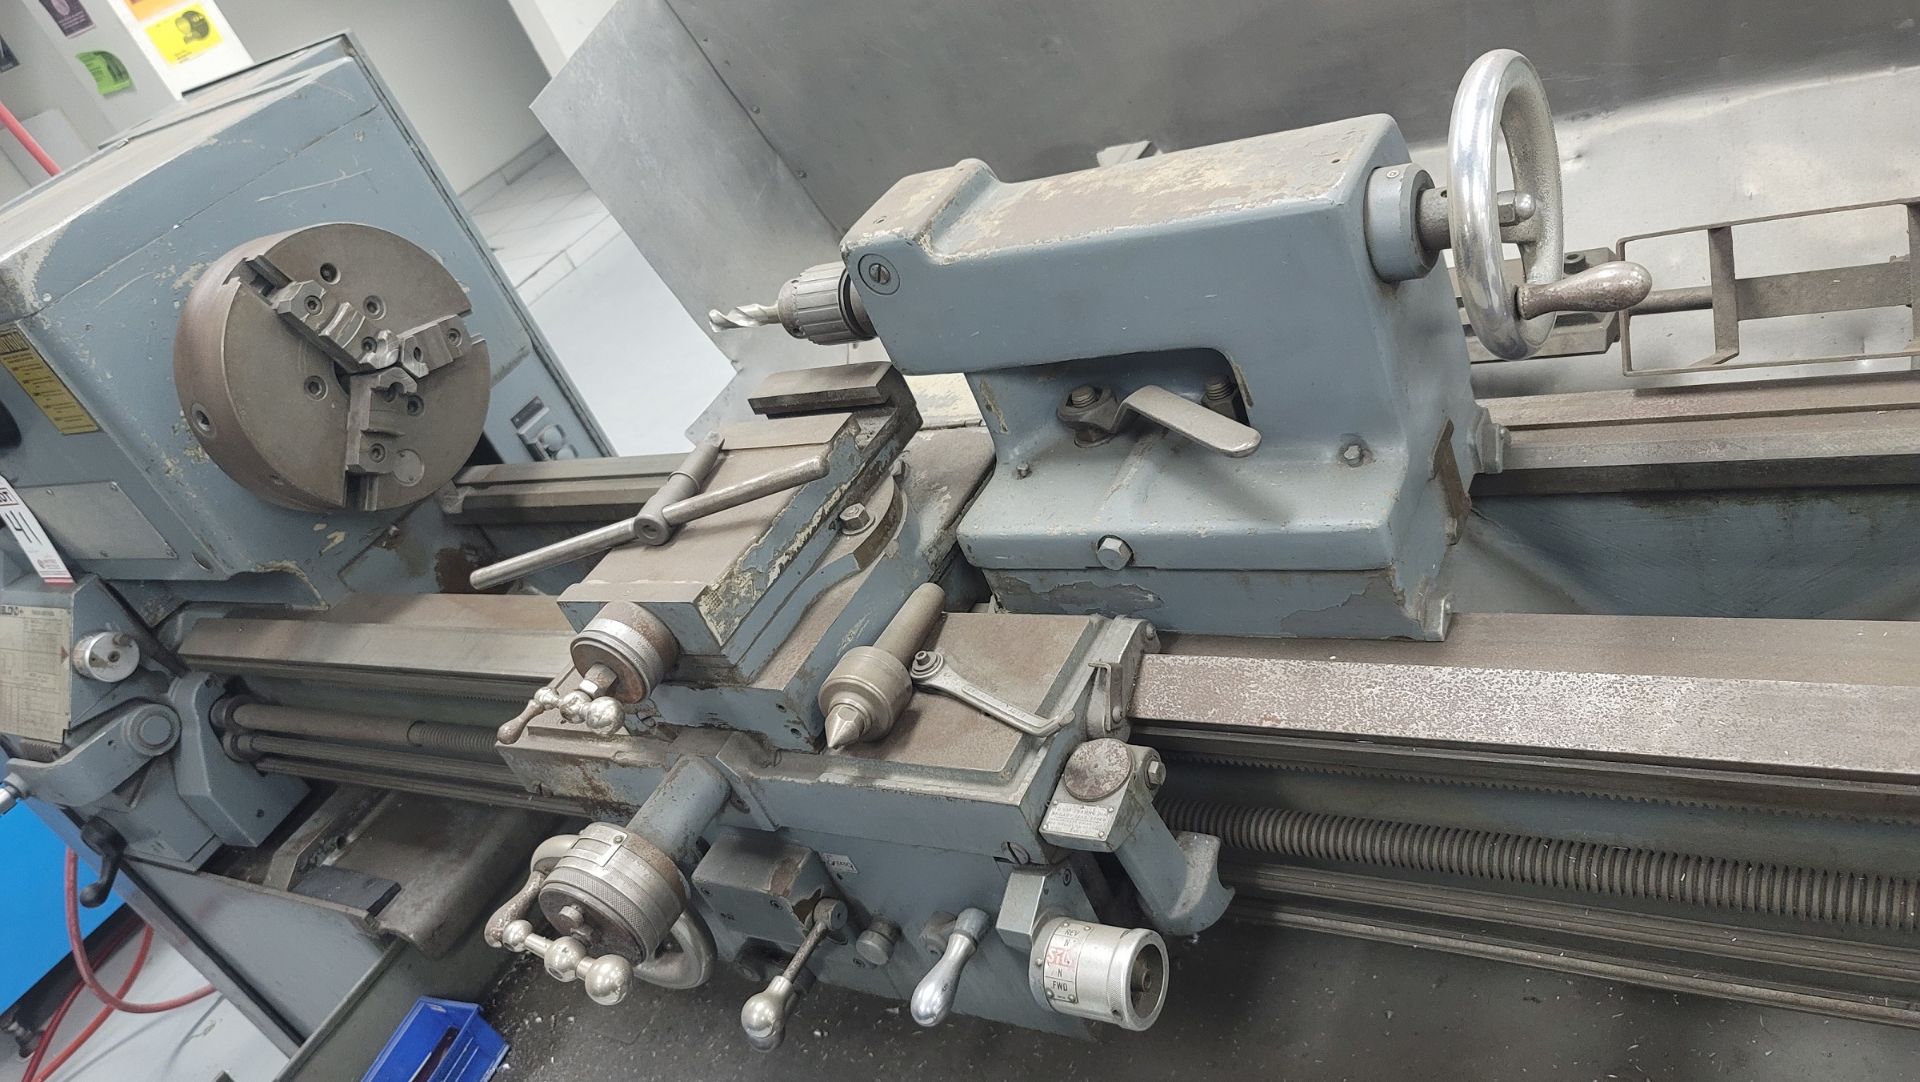 LEBLOND ENGINE LATHE, S/N 10E-259 X0-355, **IMMEX REGISTERED EQUIPMENT (NEEDS TO RETURN TO THE US) - Image 3 of 6